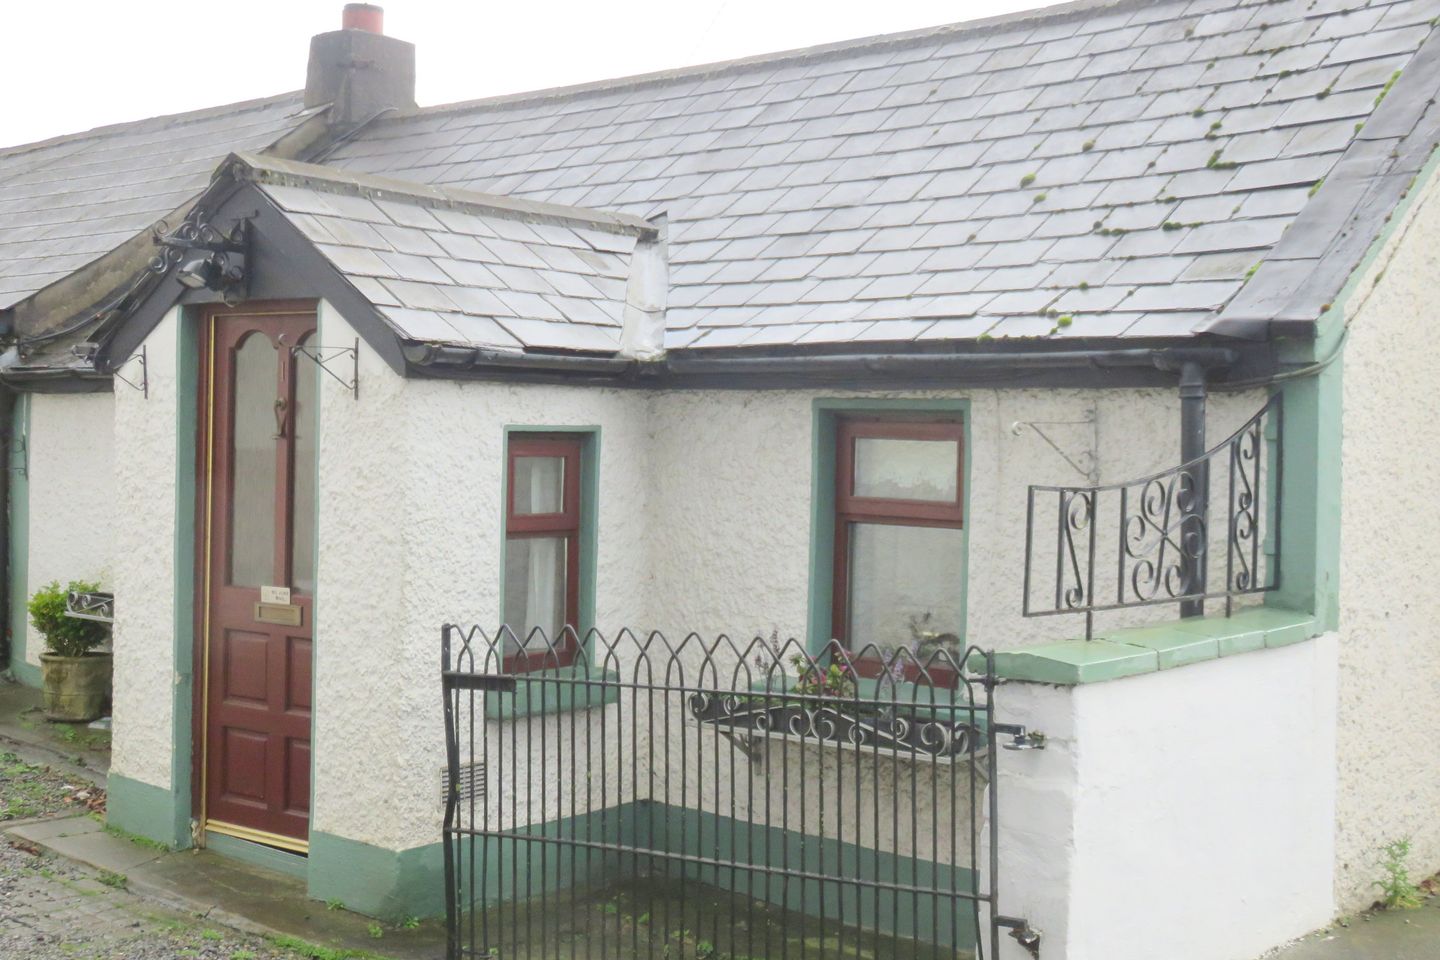 1 New Road Cottages, New Road, Clondalkin, Dublin 22